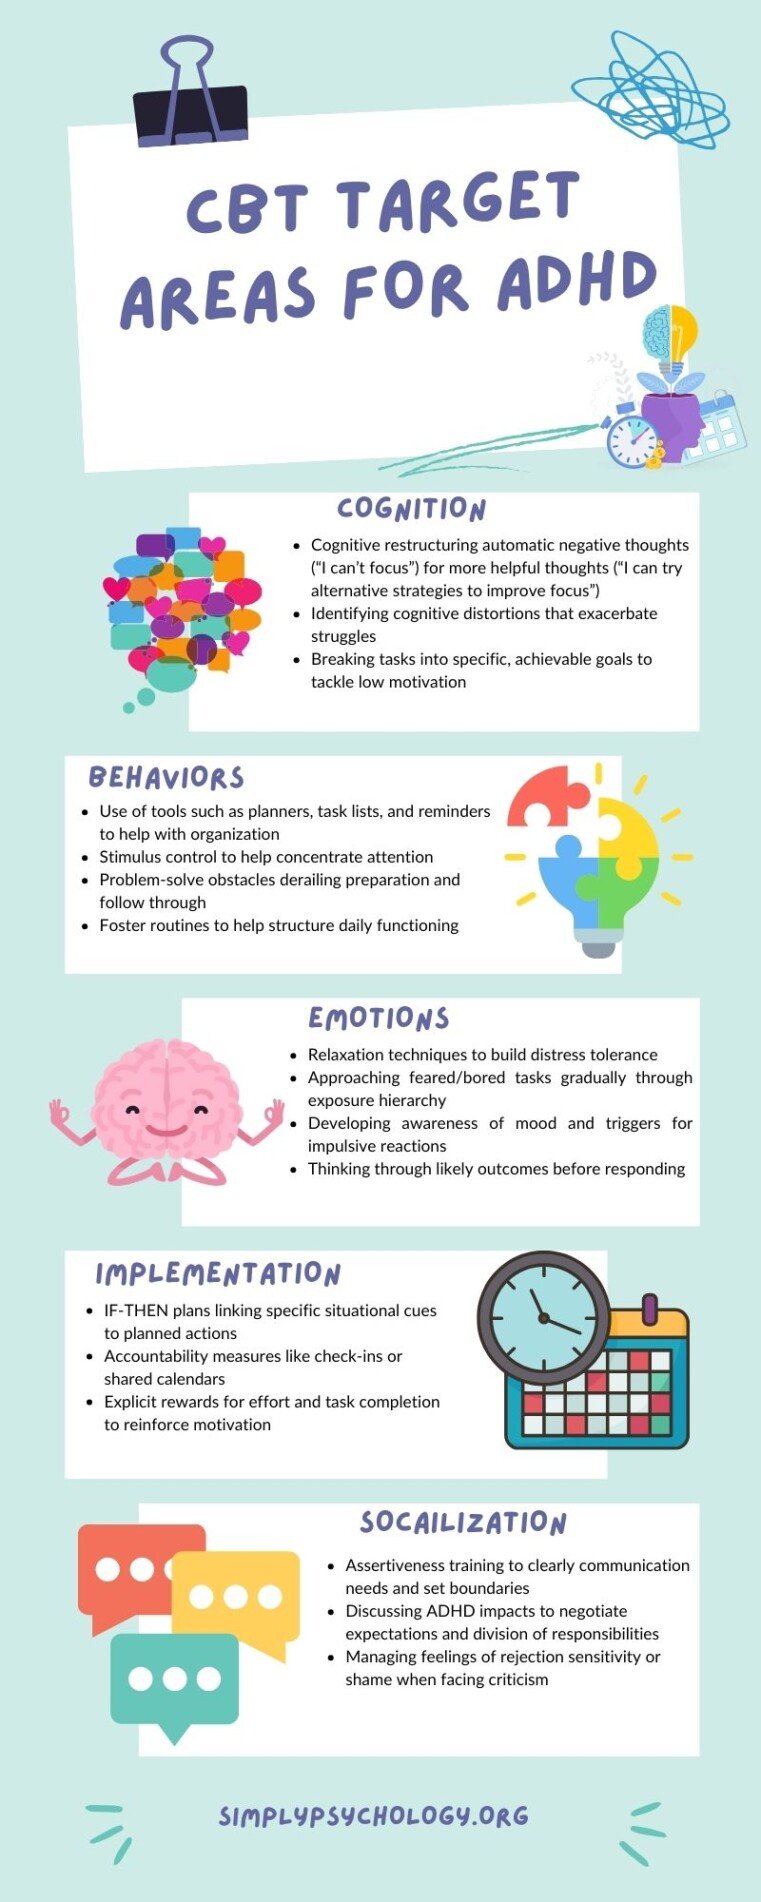 An infographic outlining the ways in which CBT can target signs of ADHD through cognition, behaviors, emotions, implementation, and socialisation methods